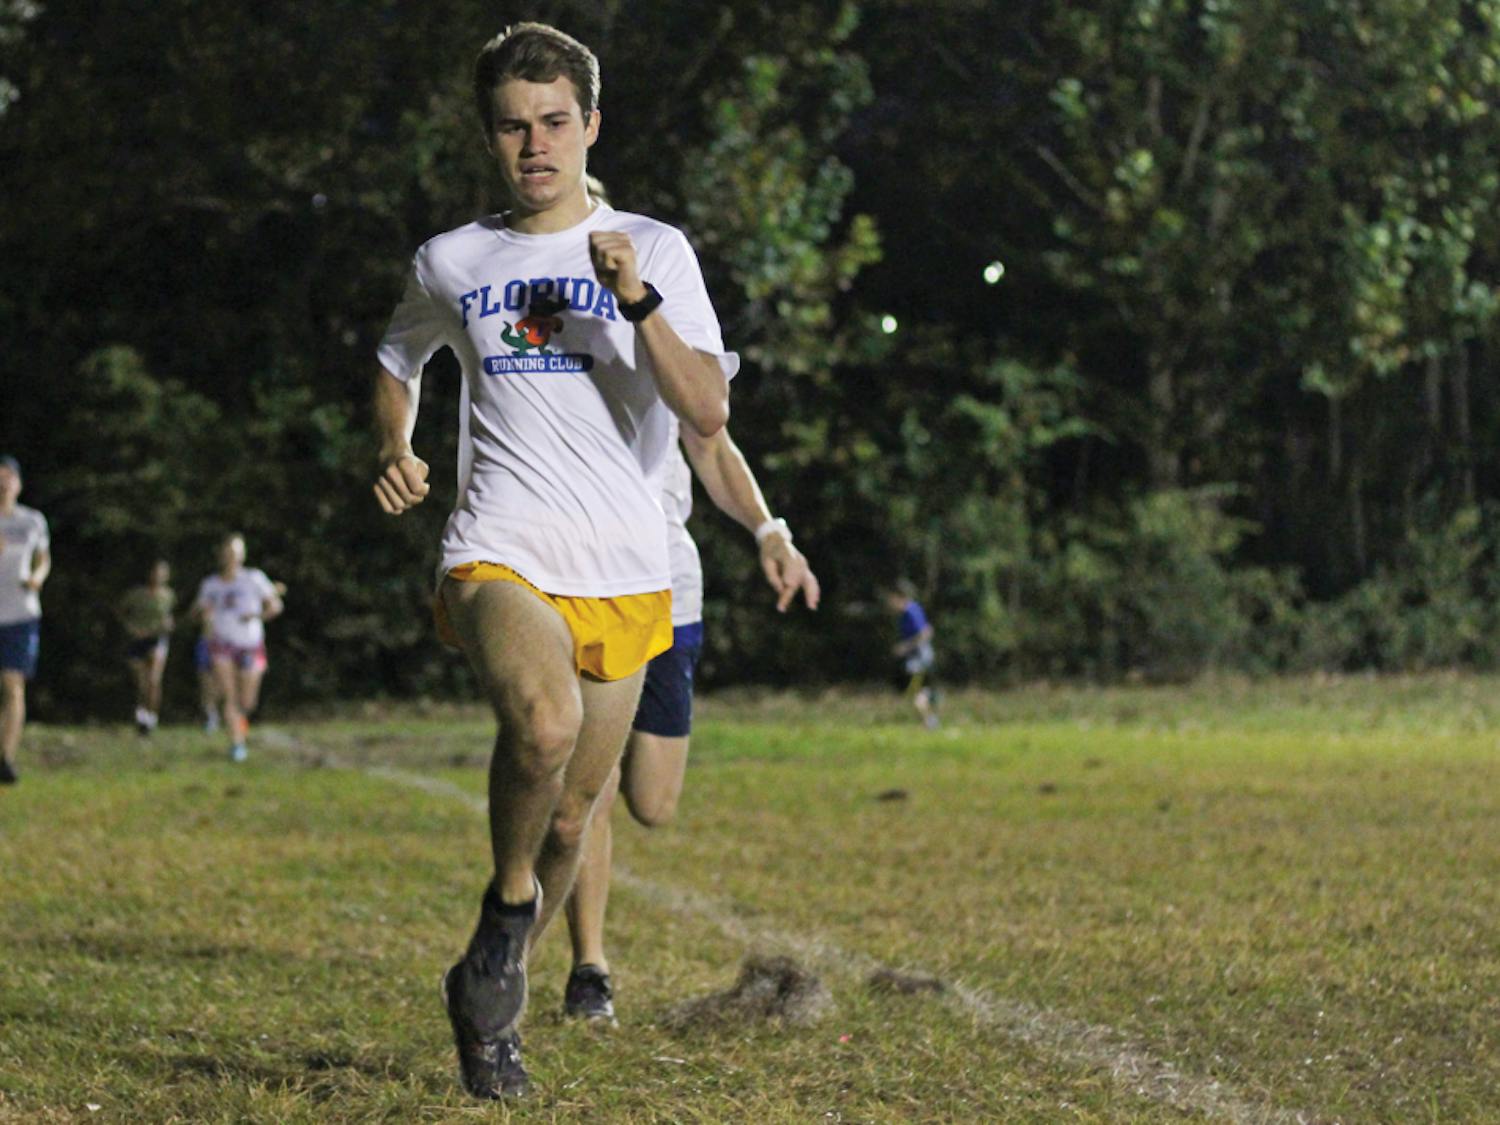 Isaac Gordon, a 19-year-old UF geology sophomore, placed first at the Thanksgiving Pie Run hosted by the Florida Running Club on Sunday evening on Hume Field.